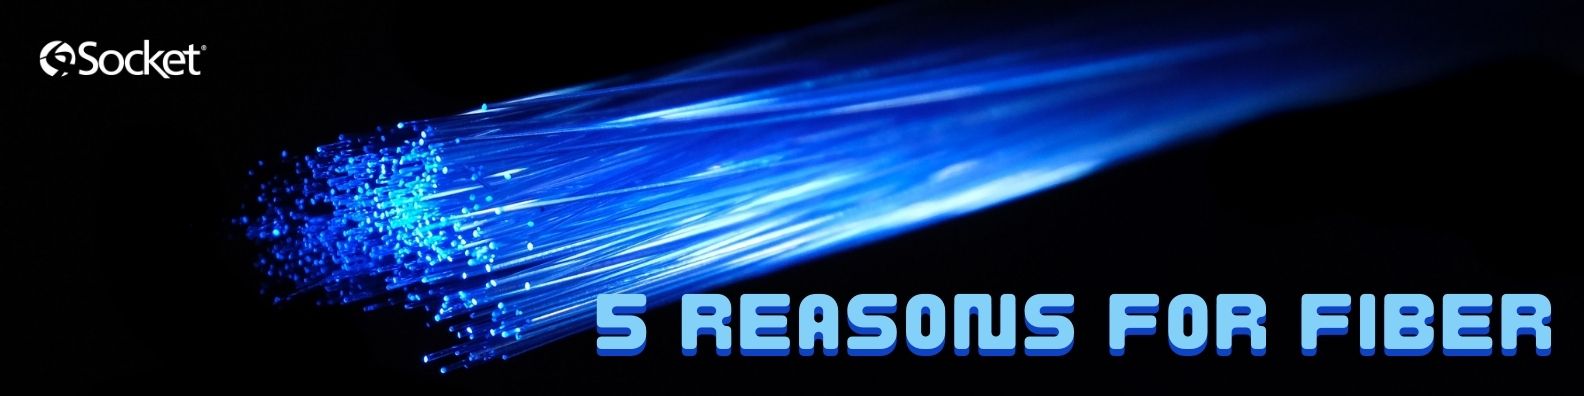 blue fiber optic cable lit up, with black background and text overlay reading "five reasons to get fiber"